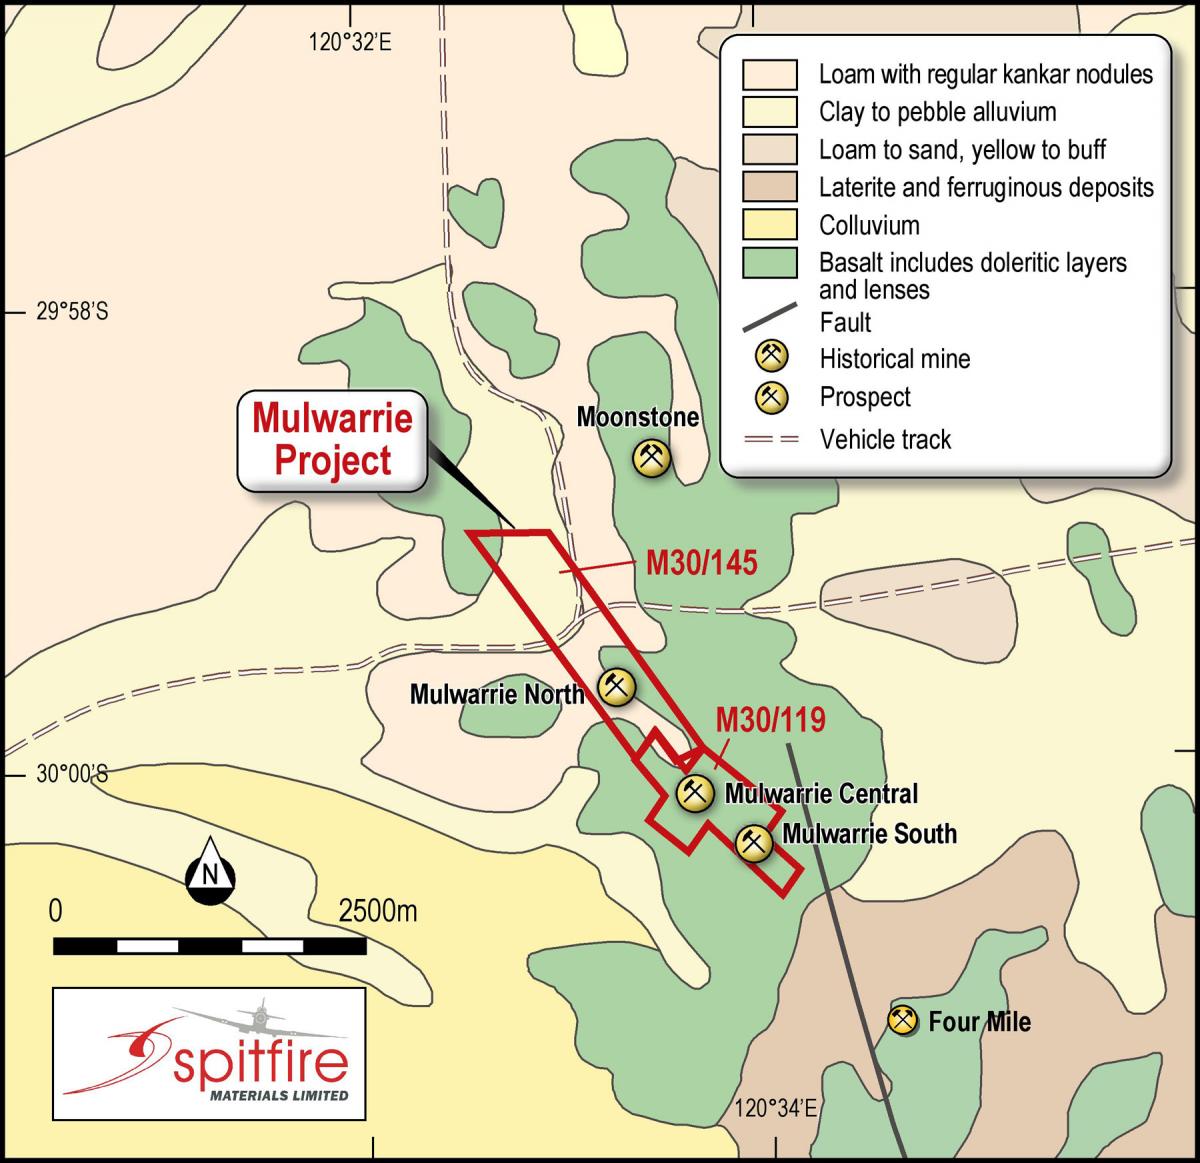 Spitfire Materials Mulwarrie tenements and simplified geology